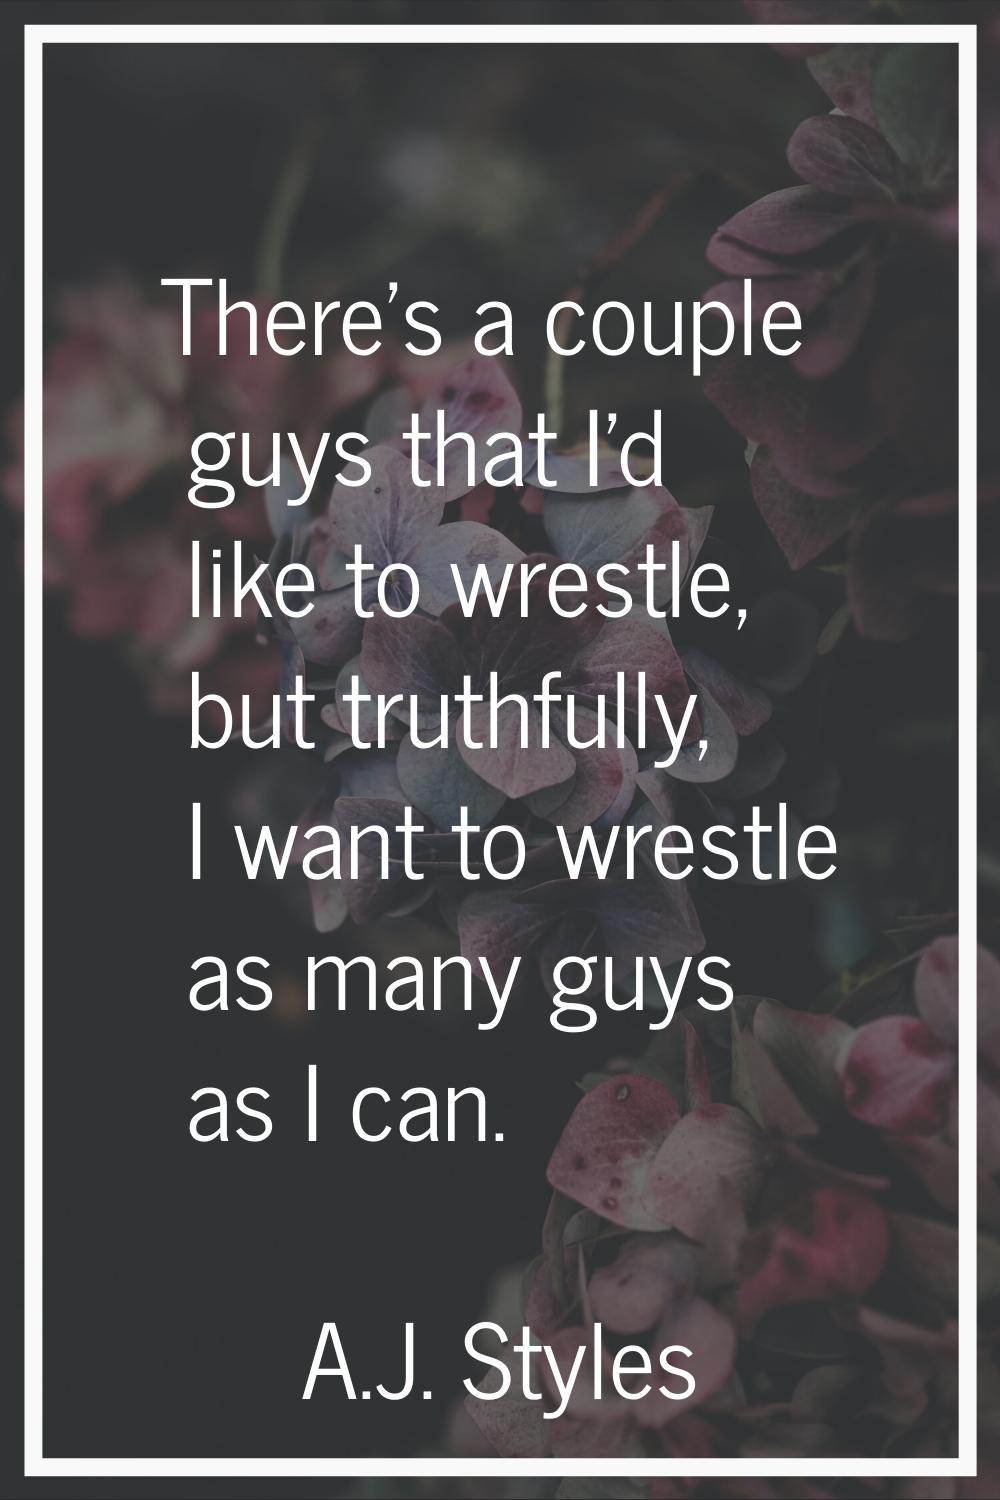 There's a couple guys that I'd like to wrestle, but truthfully, I want to wrestle as many guys as I